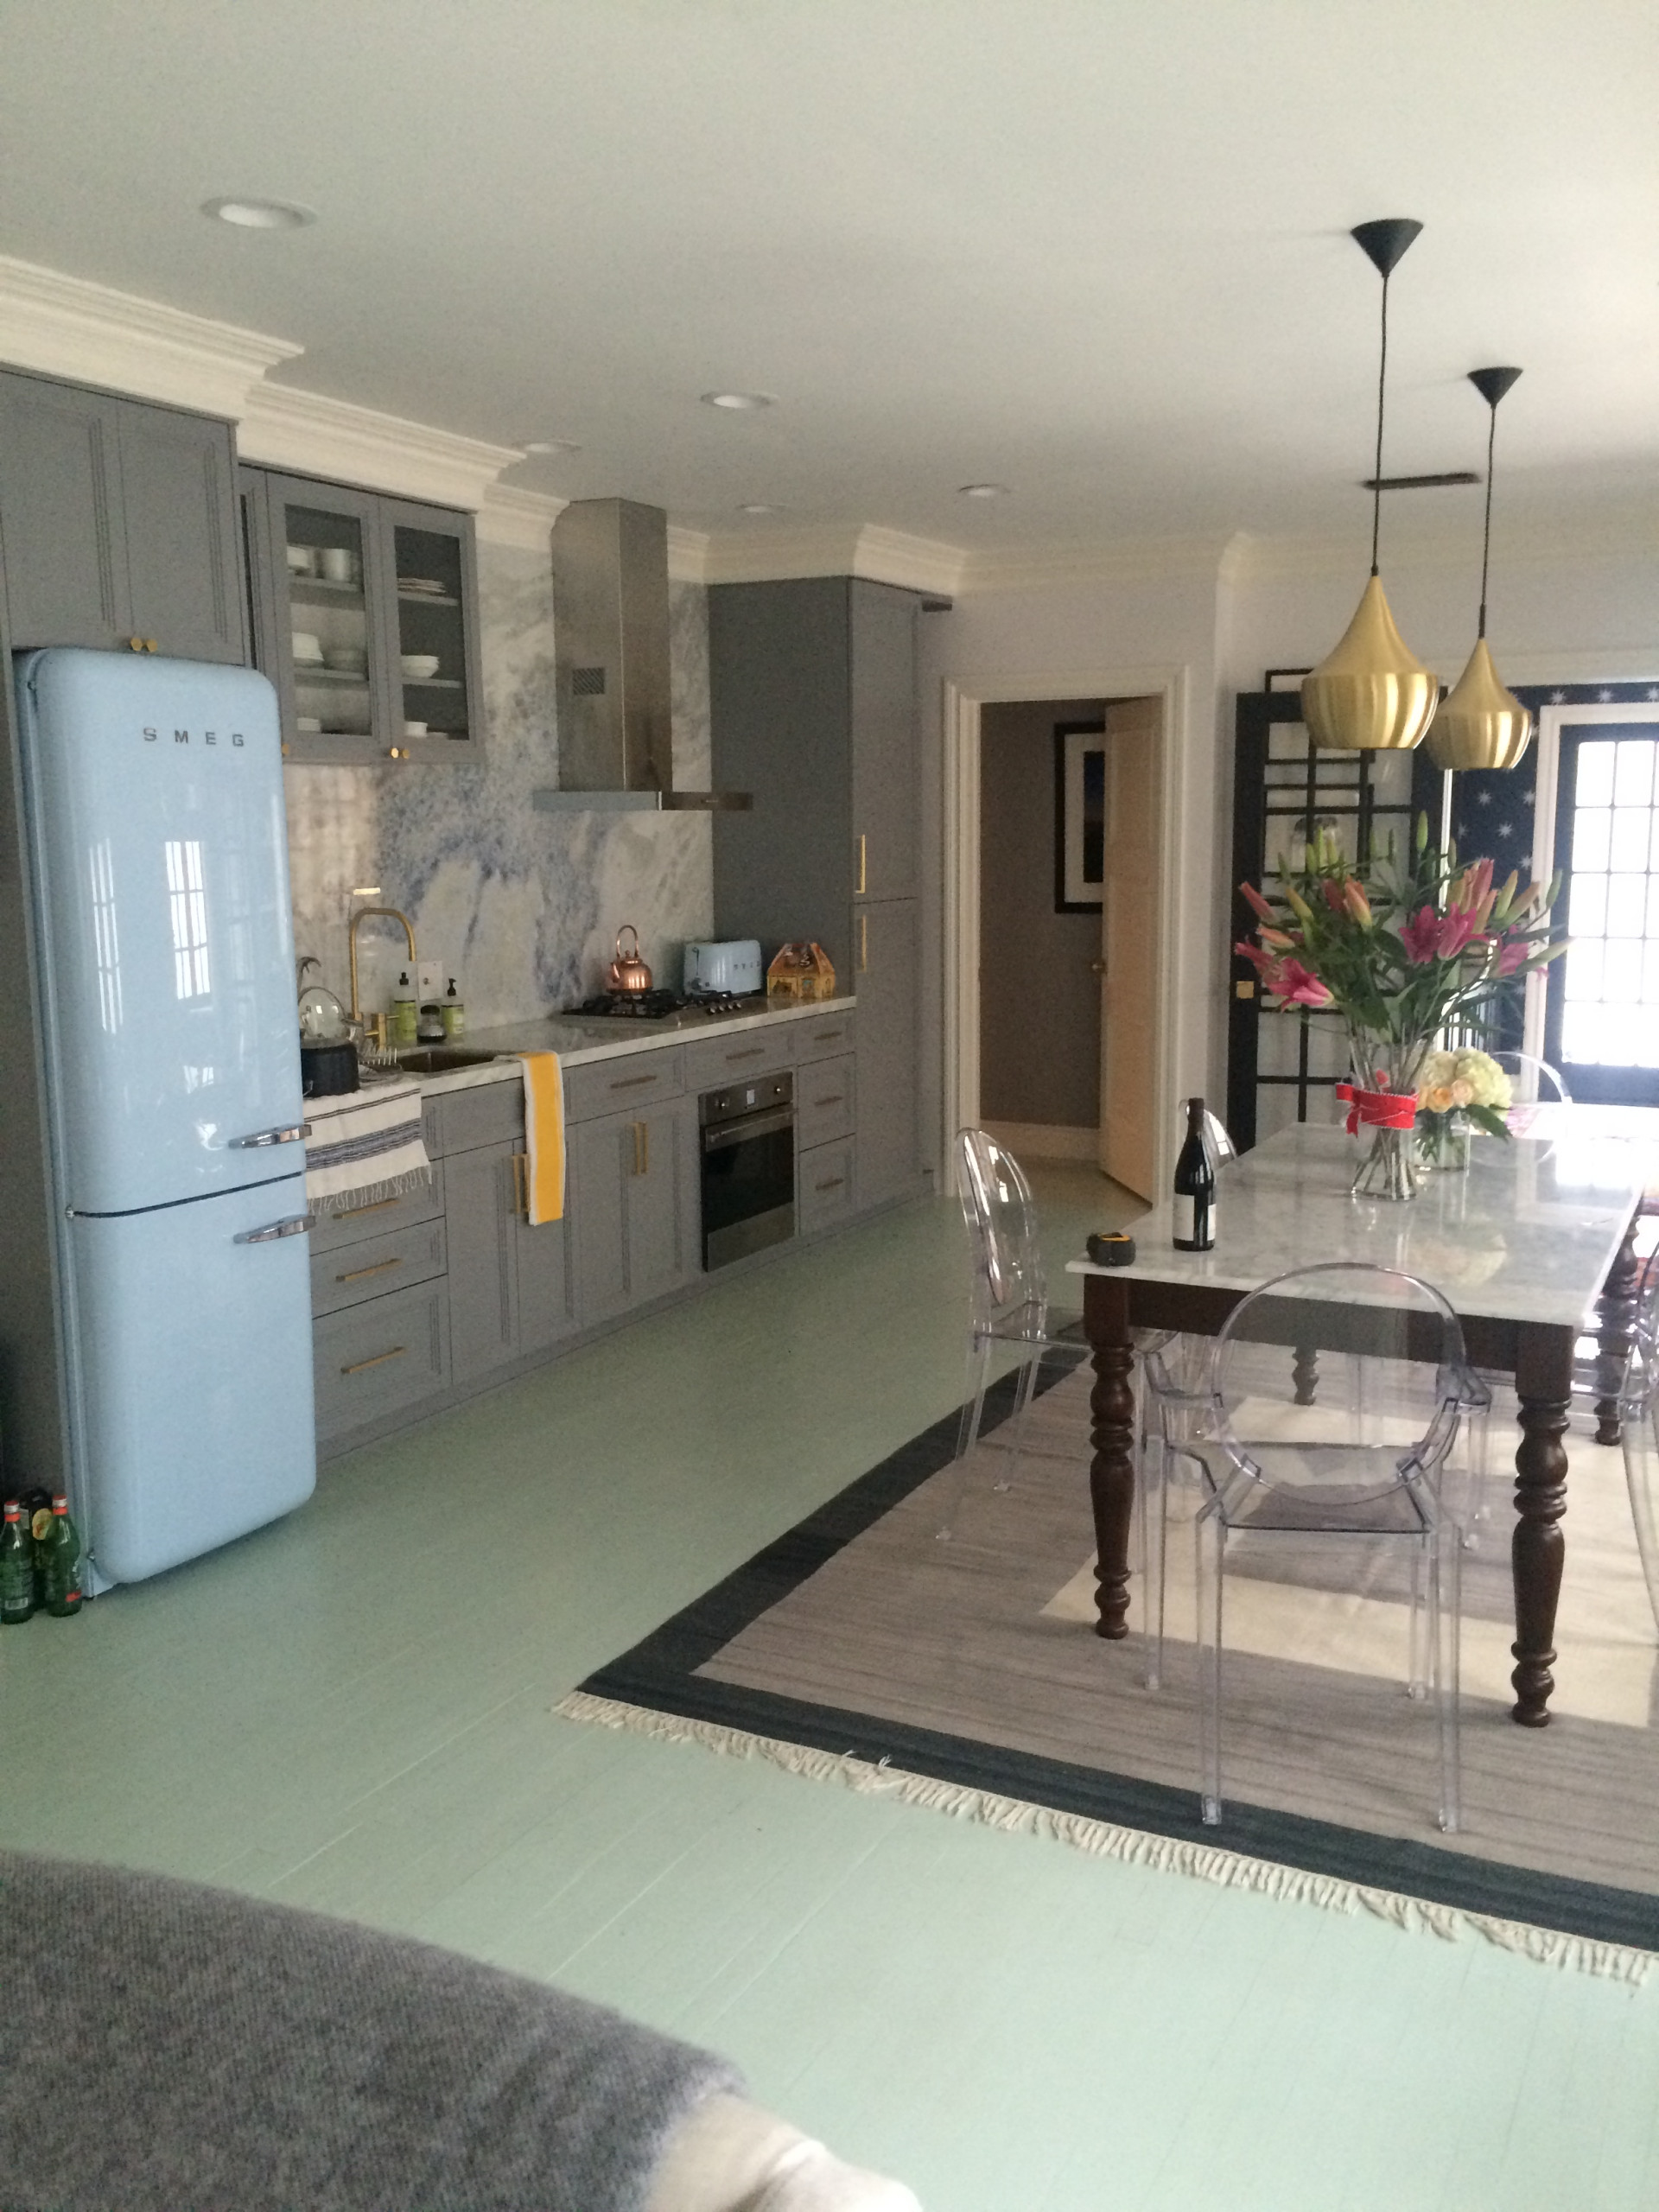 Kitchens and Common Areas